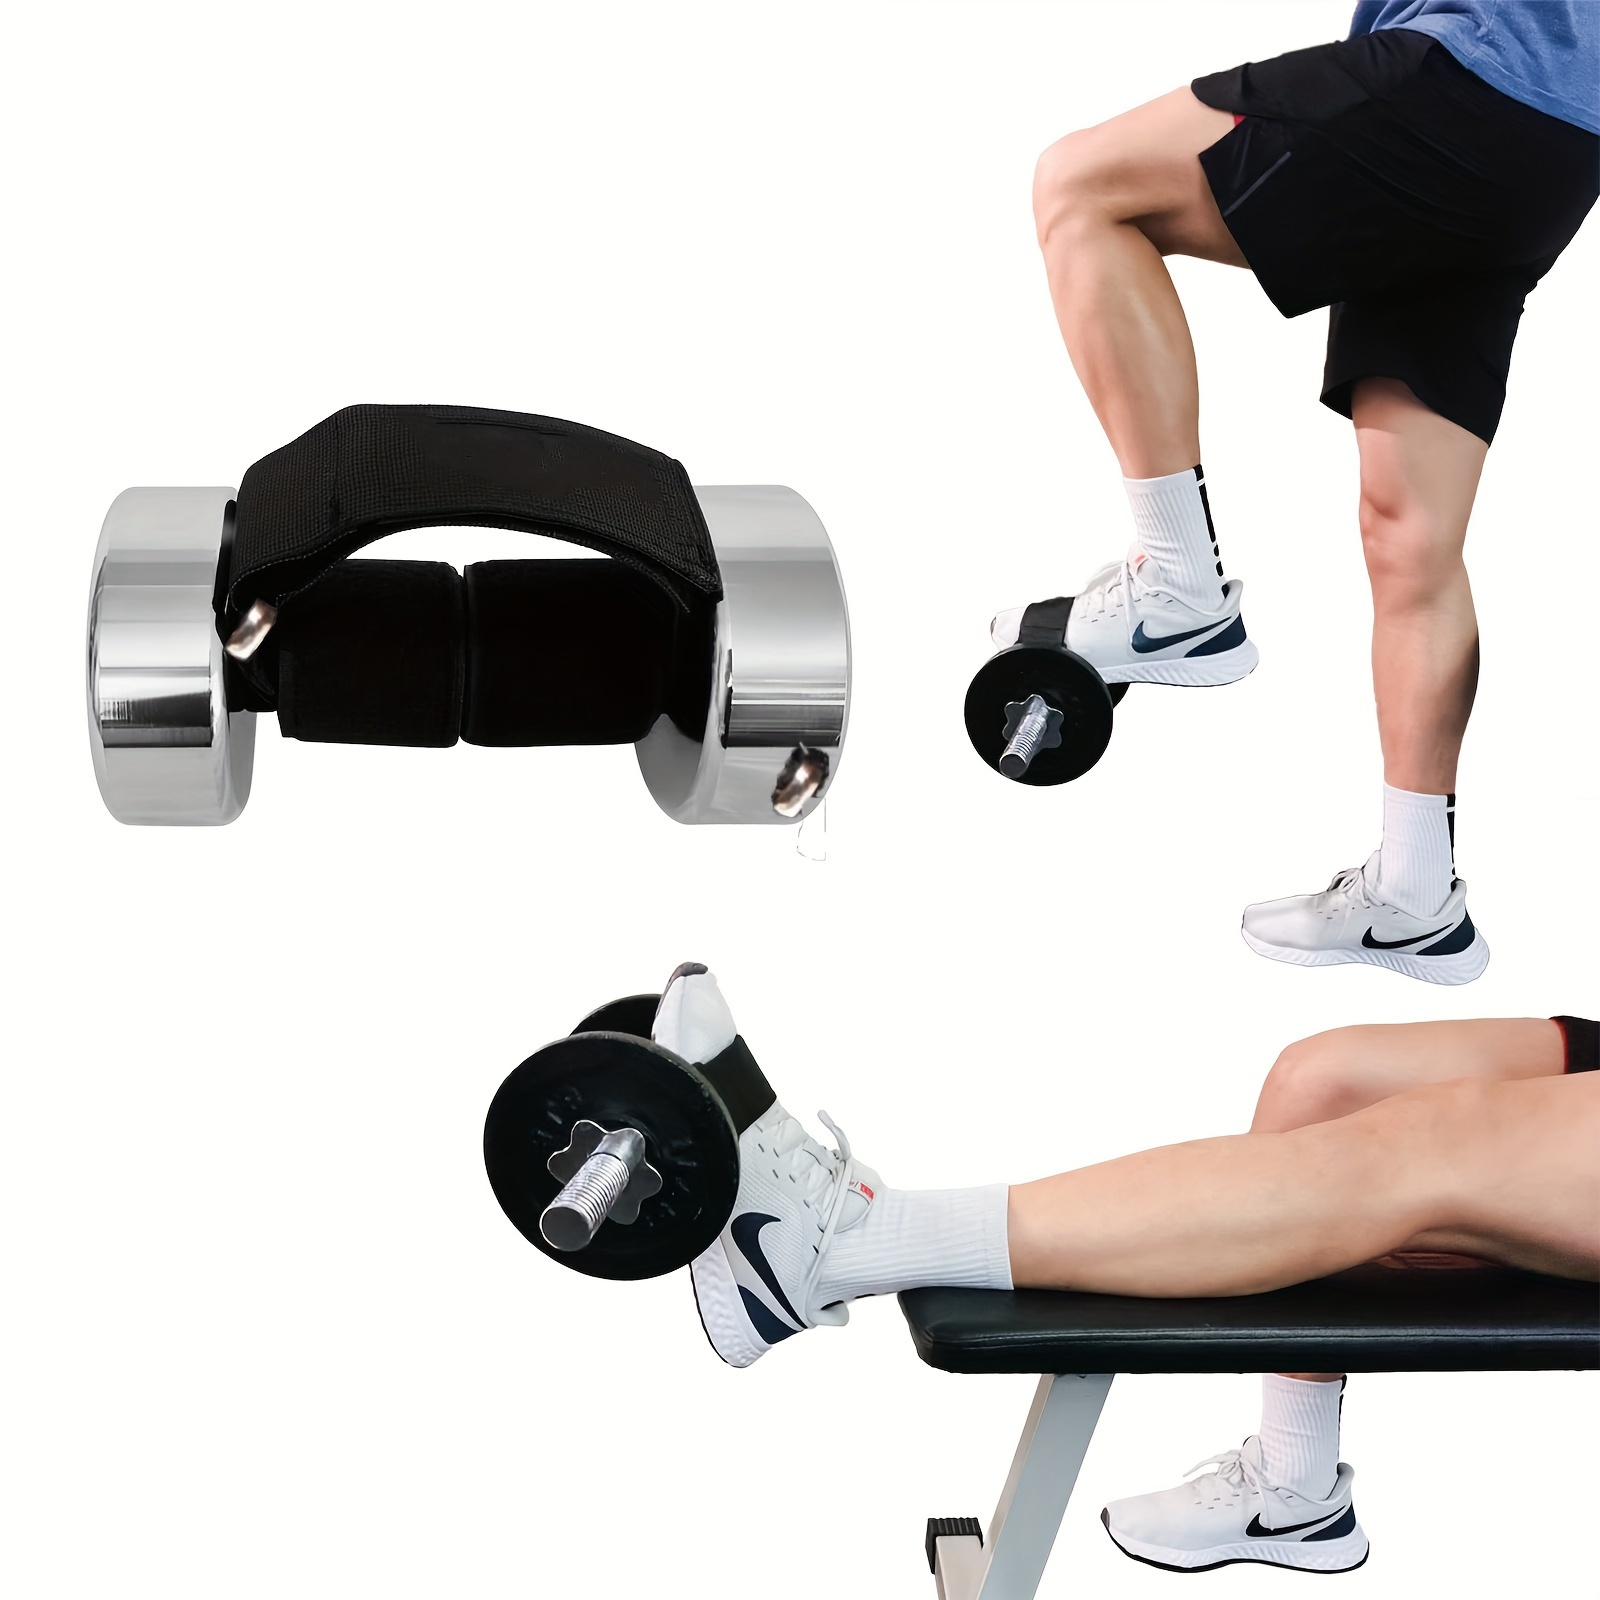 Weights- ankle weights for exercise and home gym